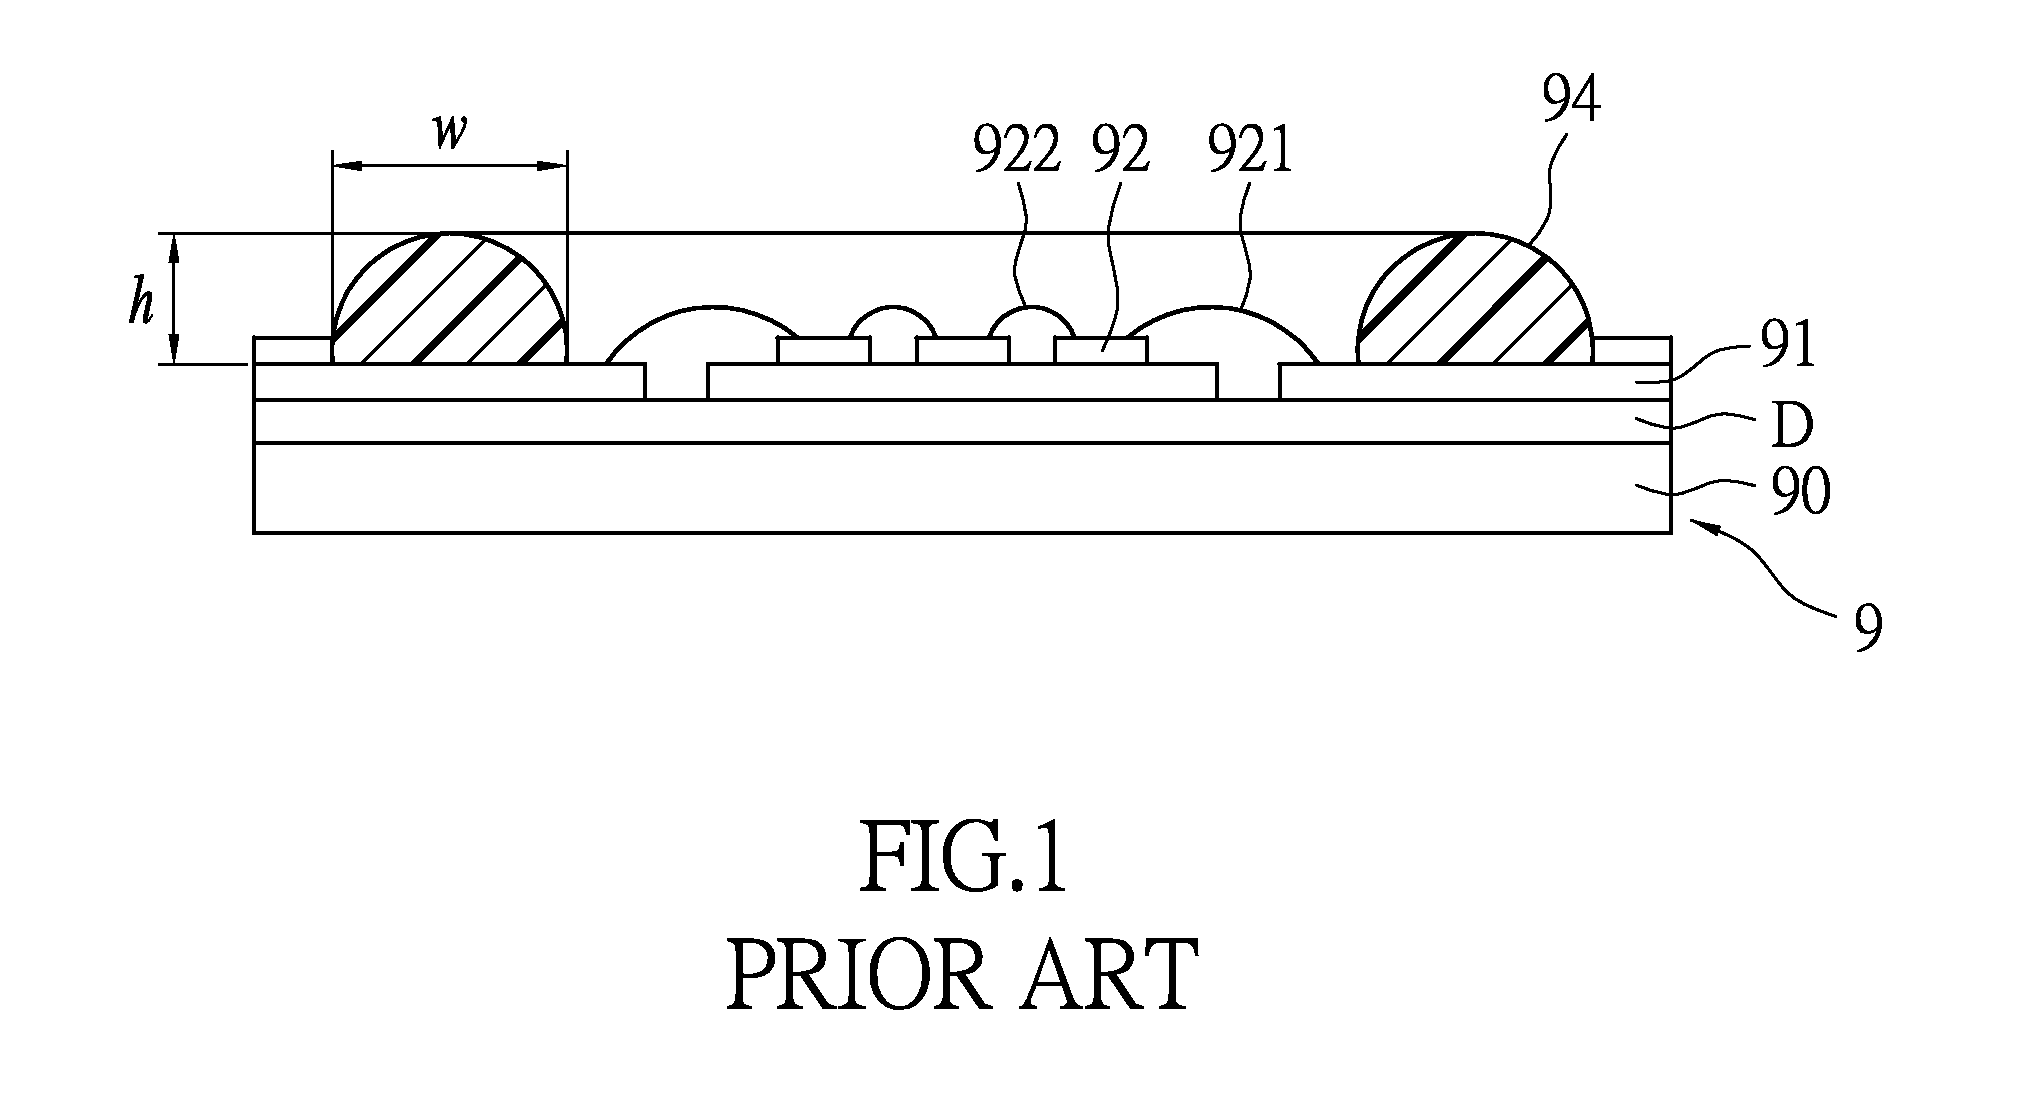 LED package structure, dam structure thereof, and method of manufacturing LED package thereof